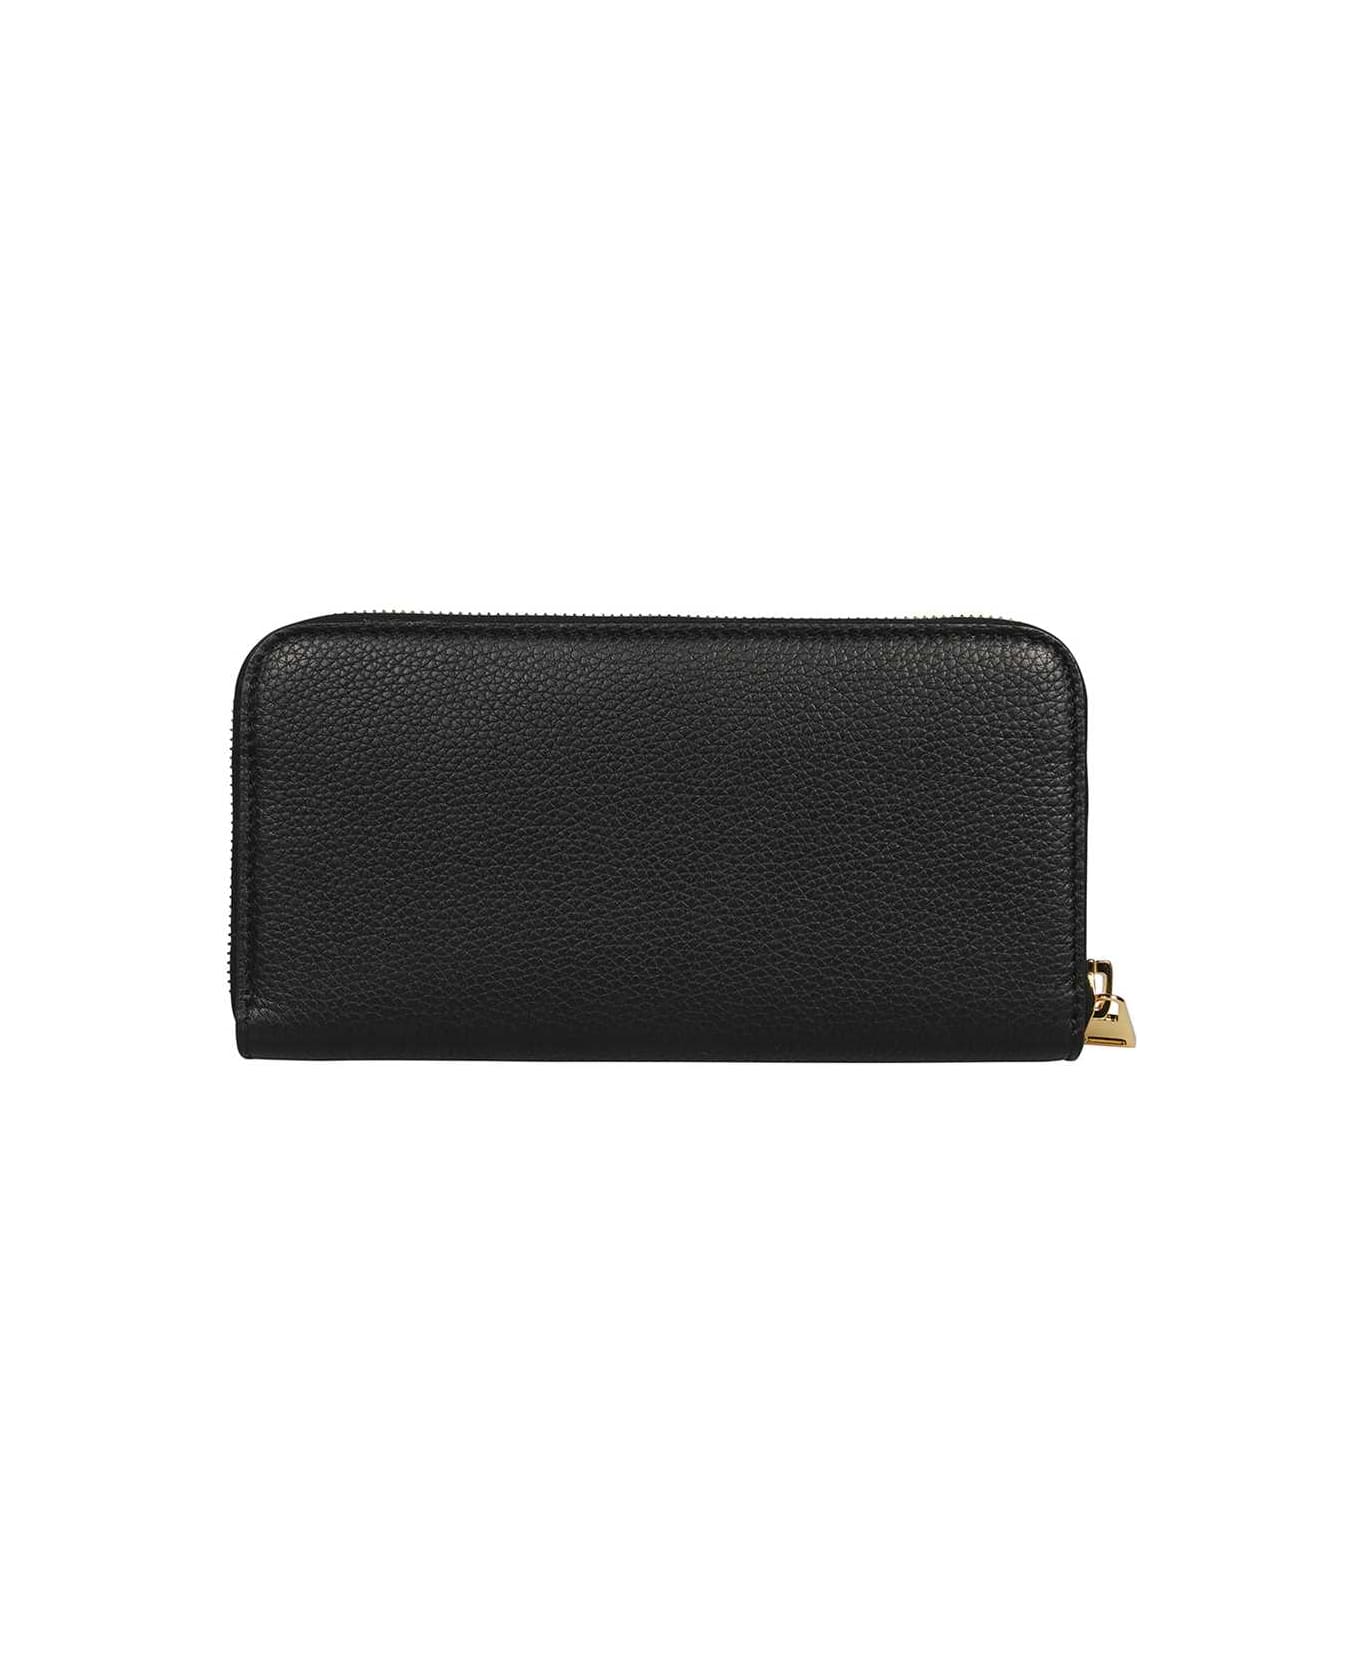 Tom Ford Leather Ziparound Wallet - black